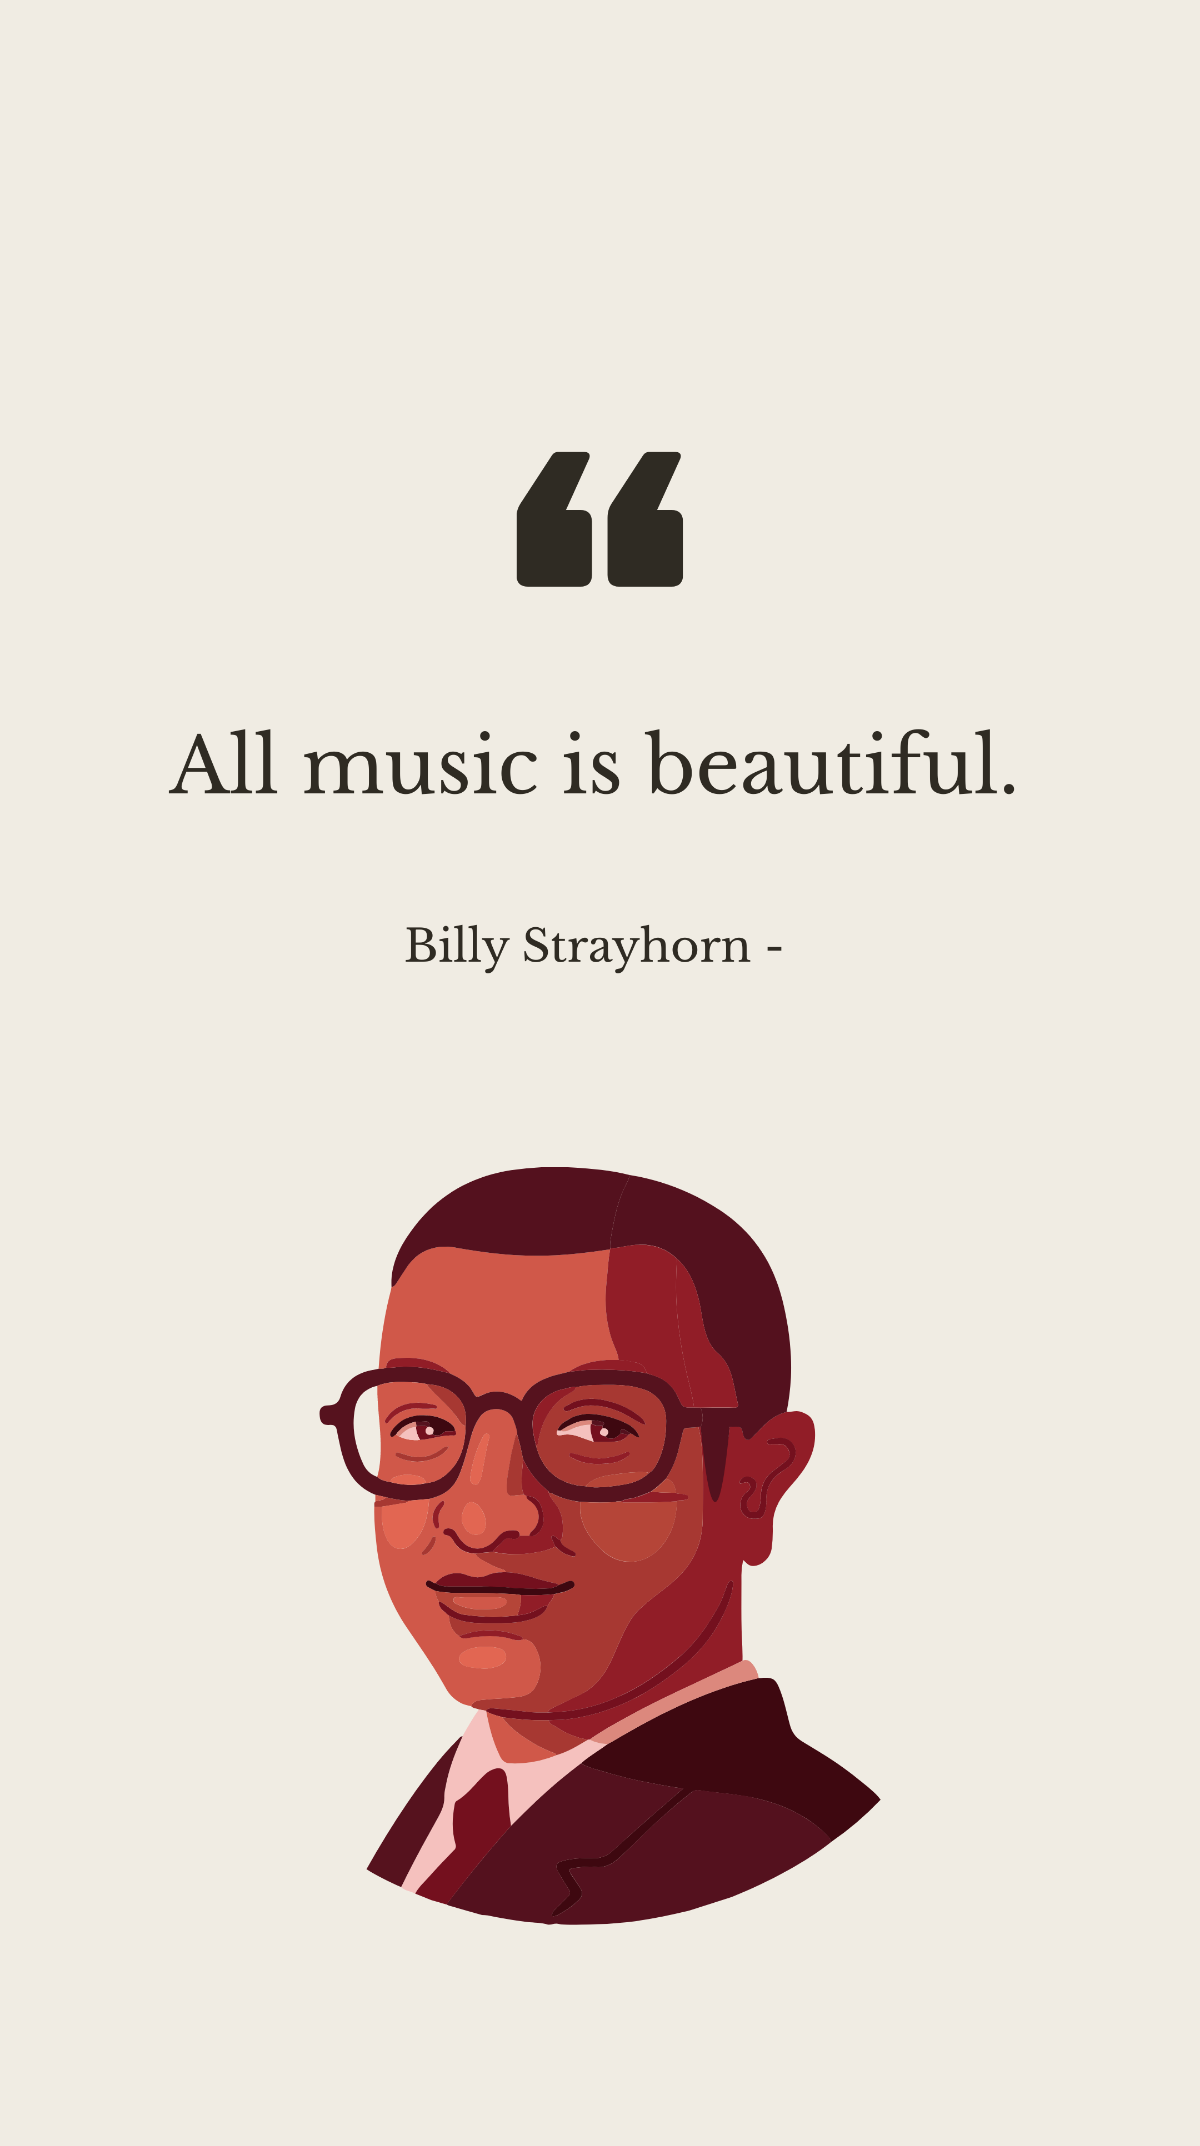 Billy Strayhorn - All music is beautiful. Template